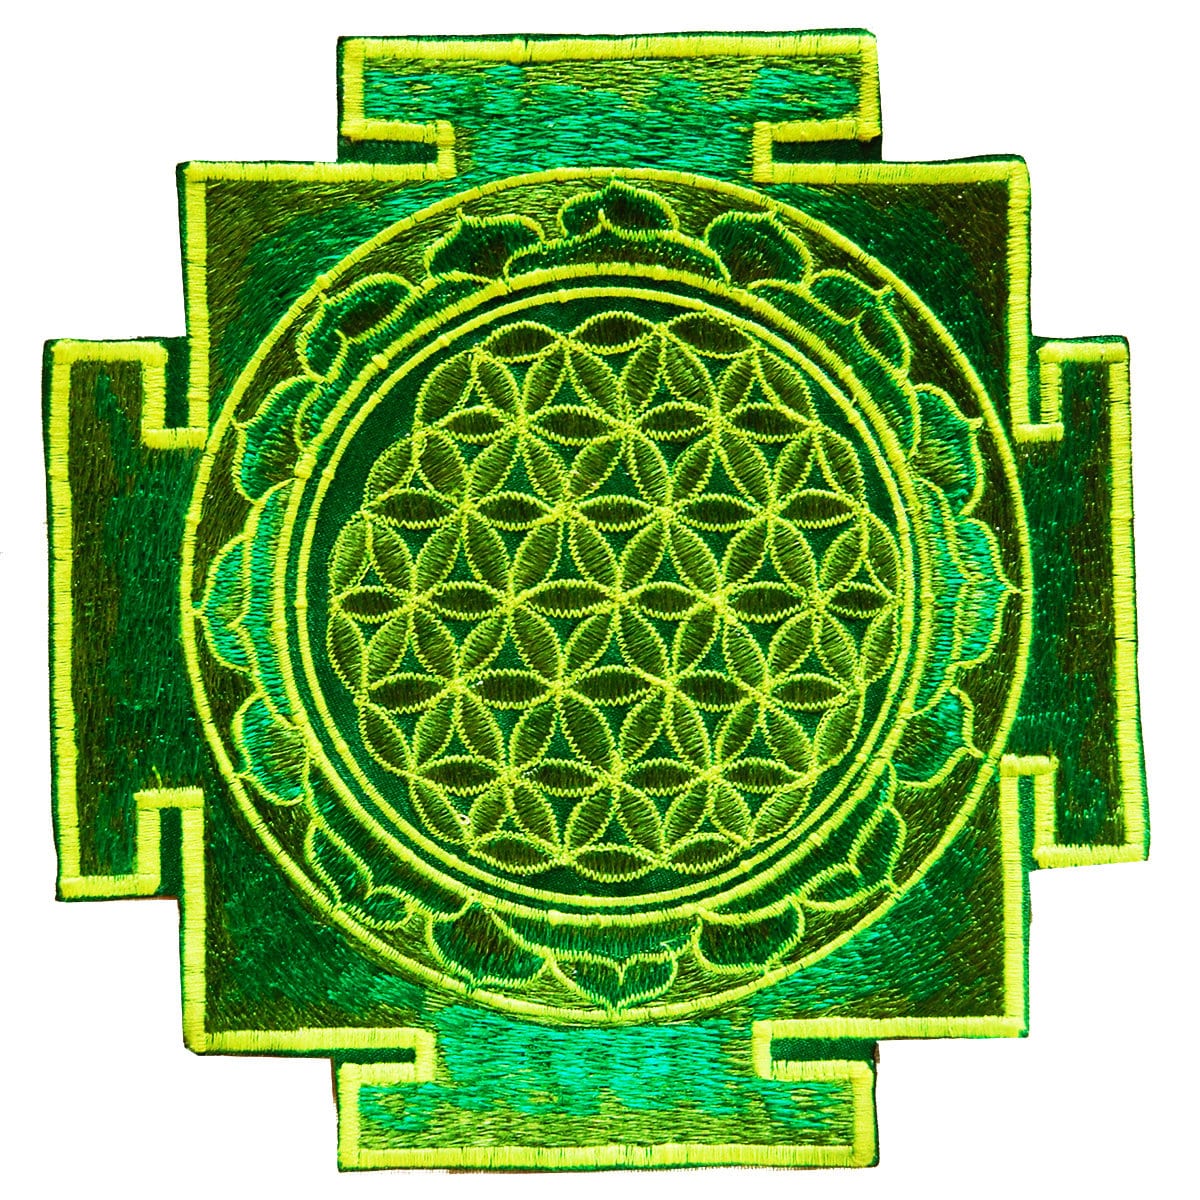 Goldbrown flower of life yantra sacred geometry patch holy healing information art